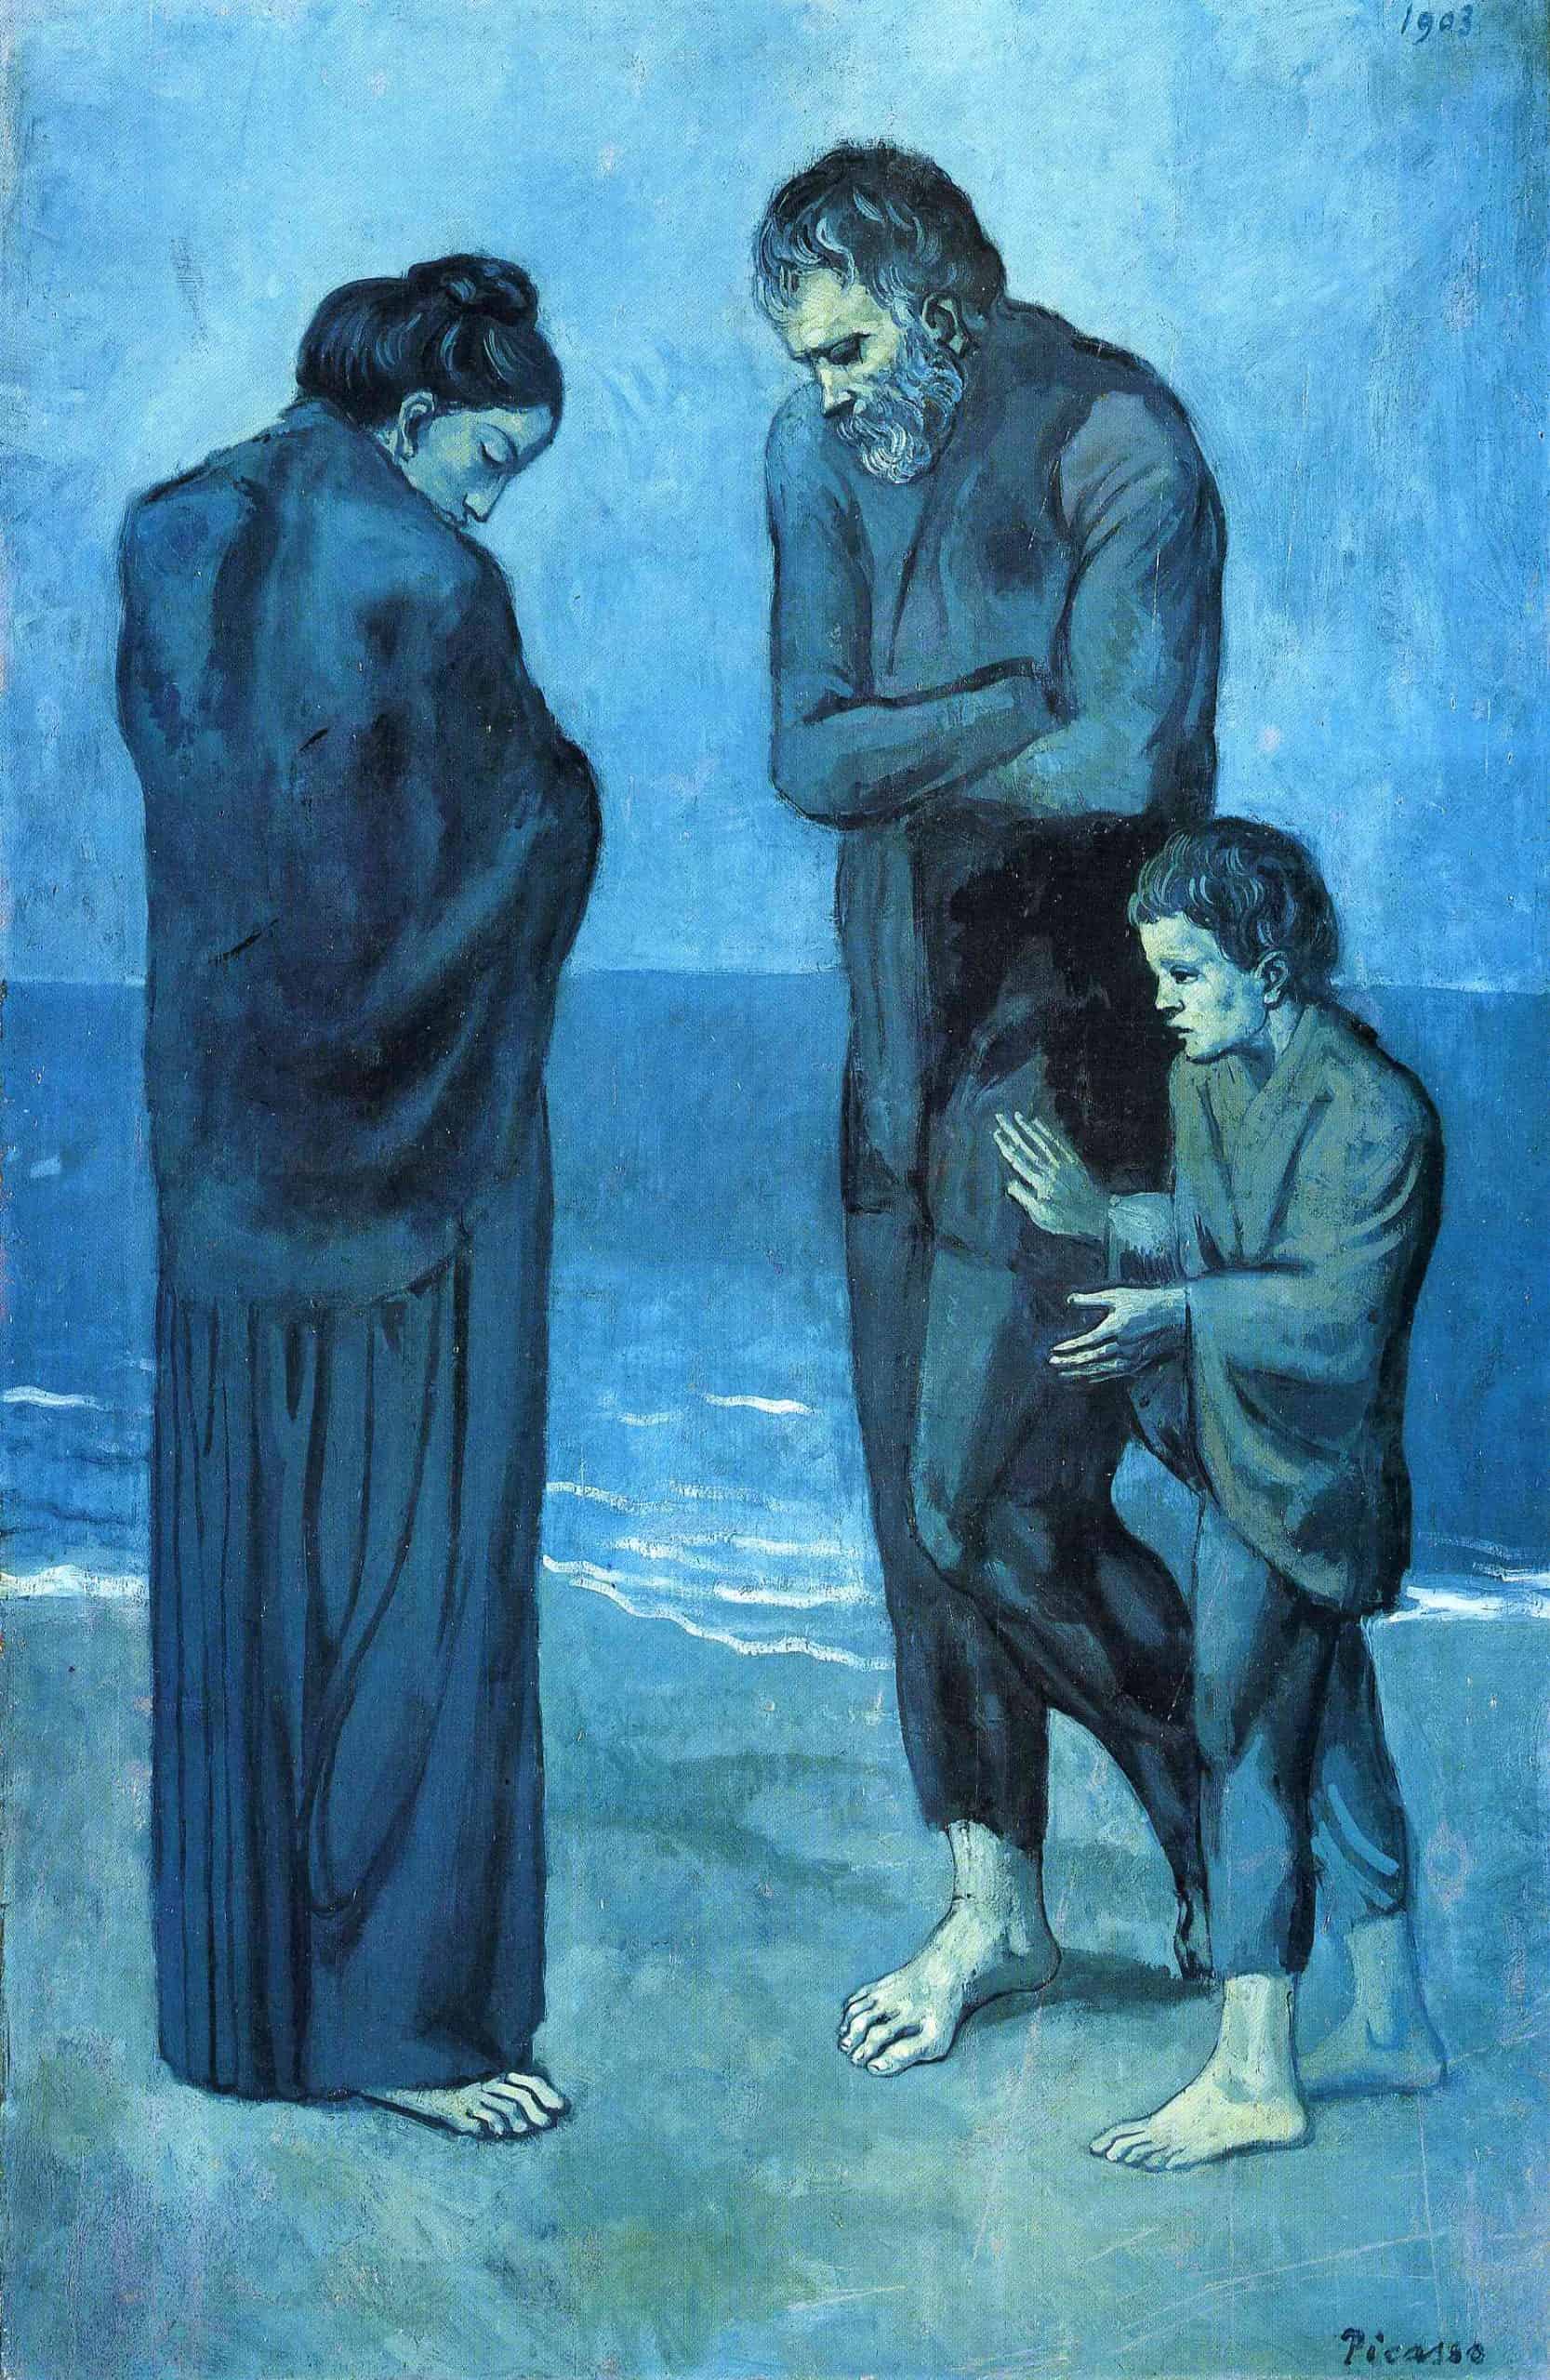 Pablo Picasso, The Tragedy, 1903